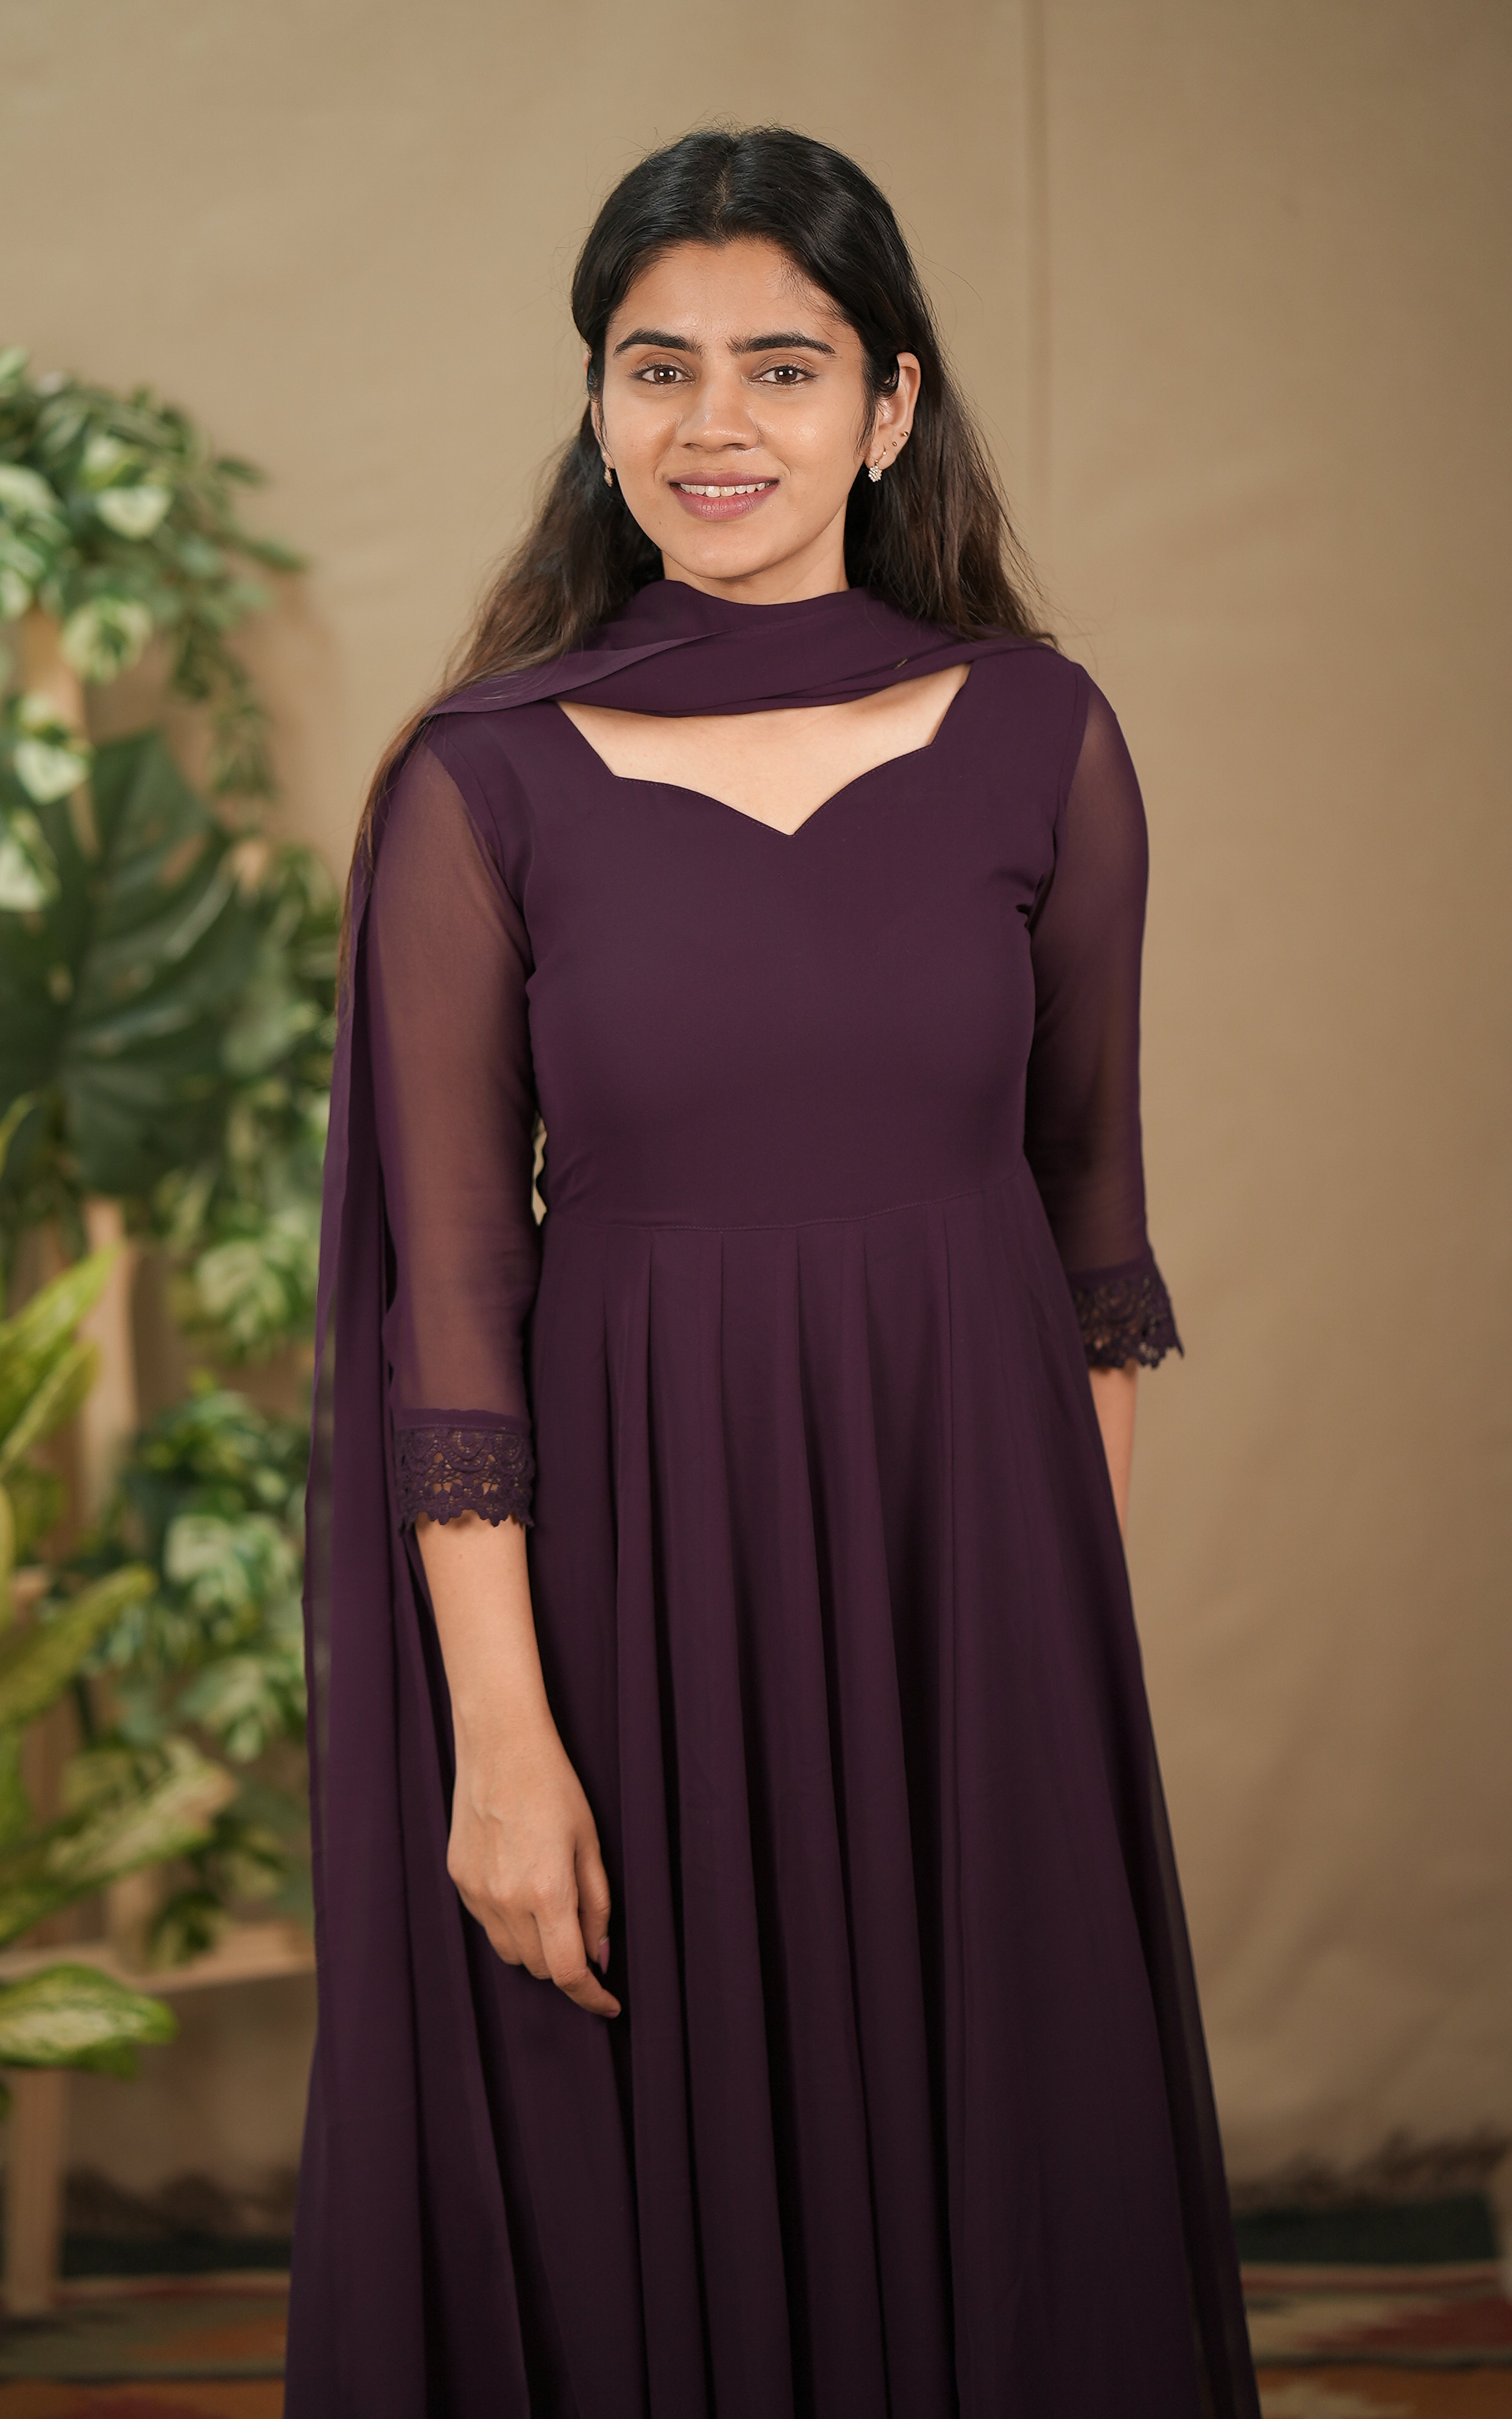 instore kurti office wear for women georgette with butter crepe lining full flared anarkali with crochet lace border color: plum